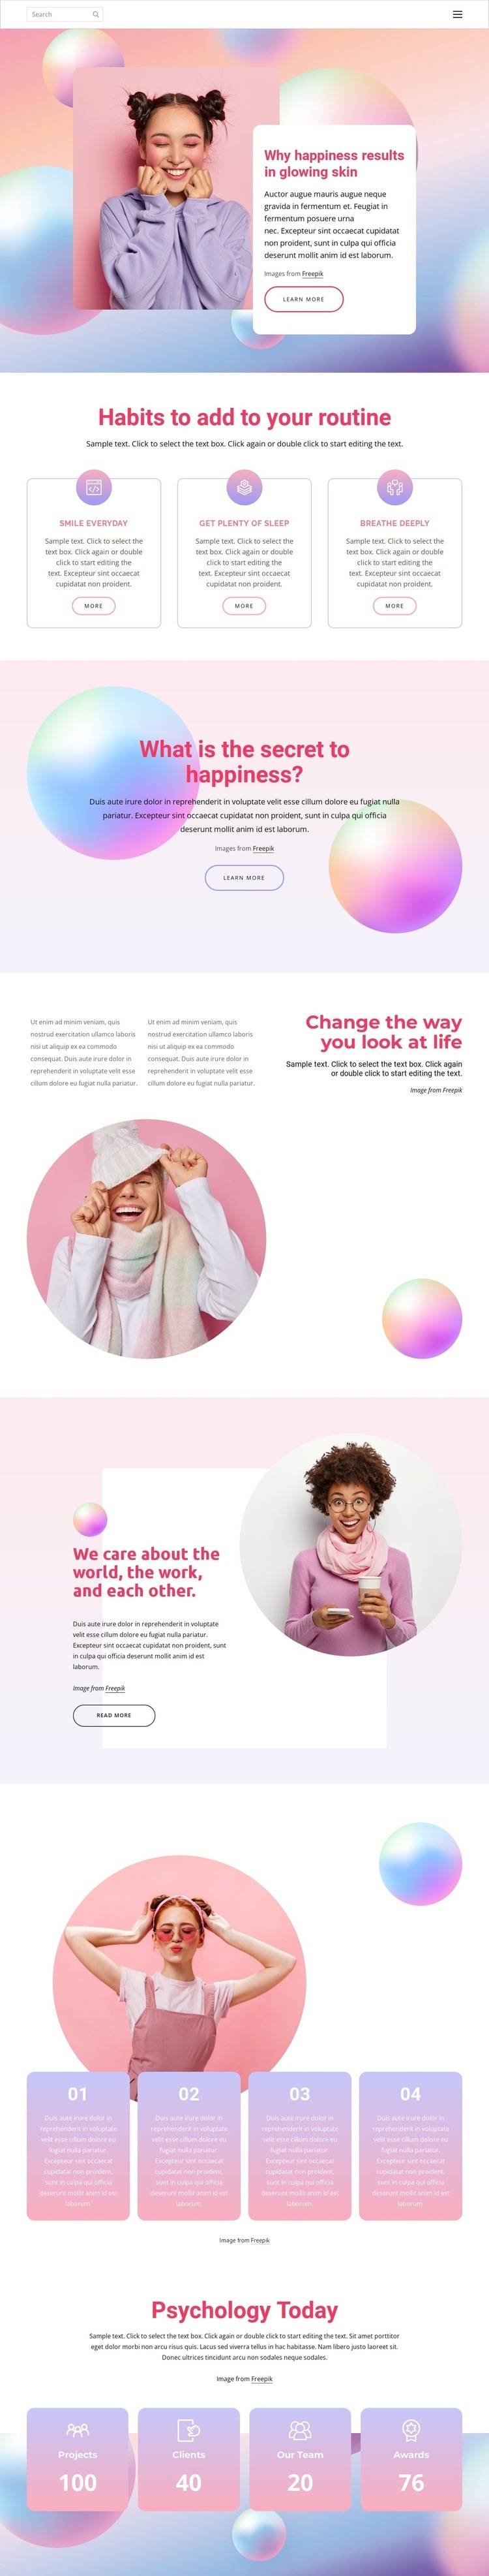 How happiness affects health Webflow Template Alternative